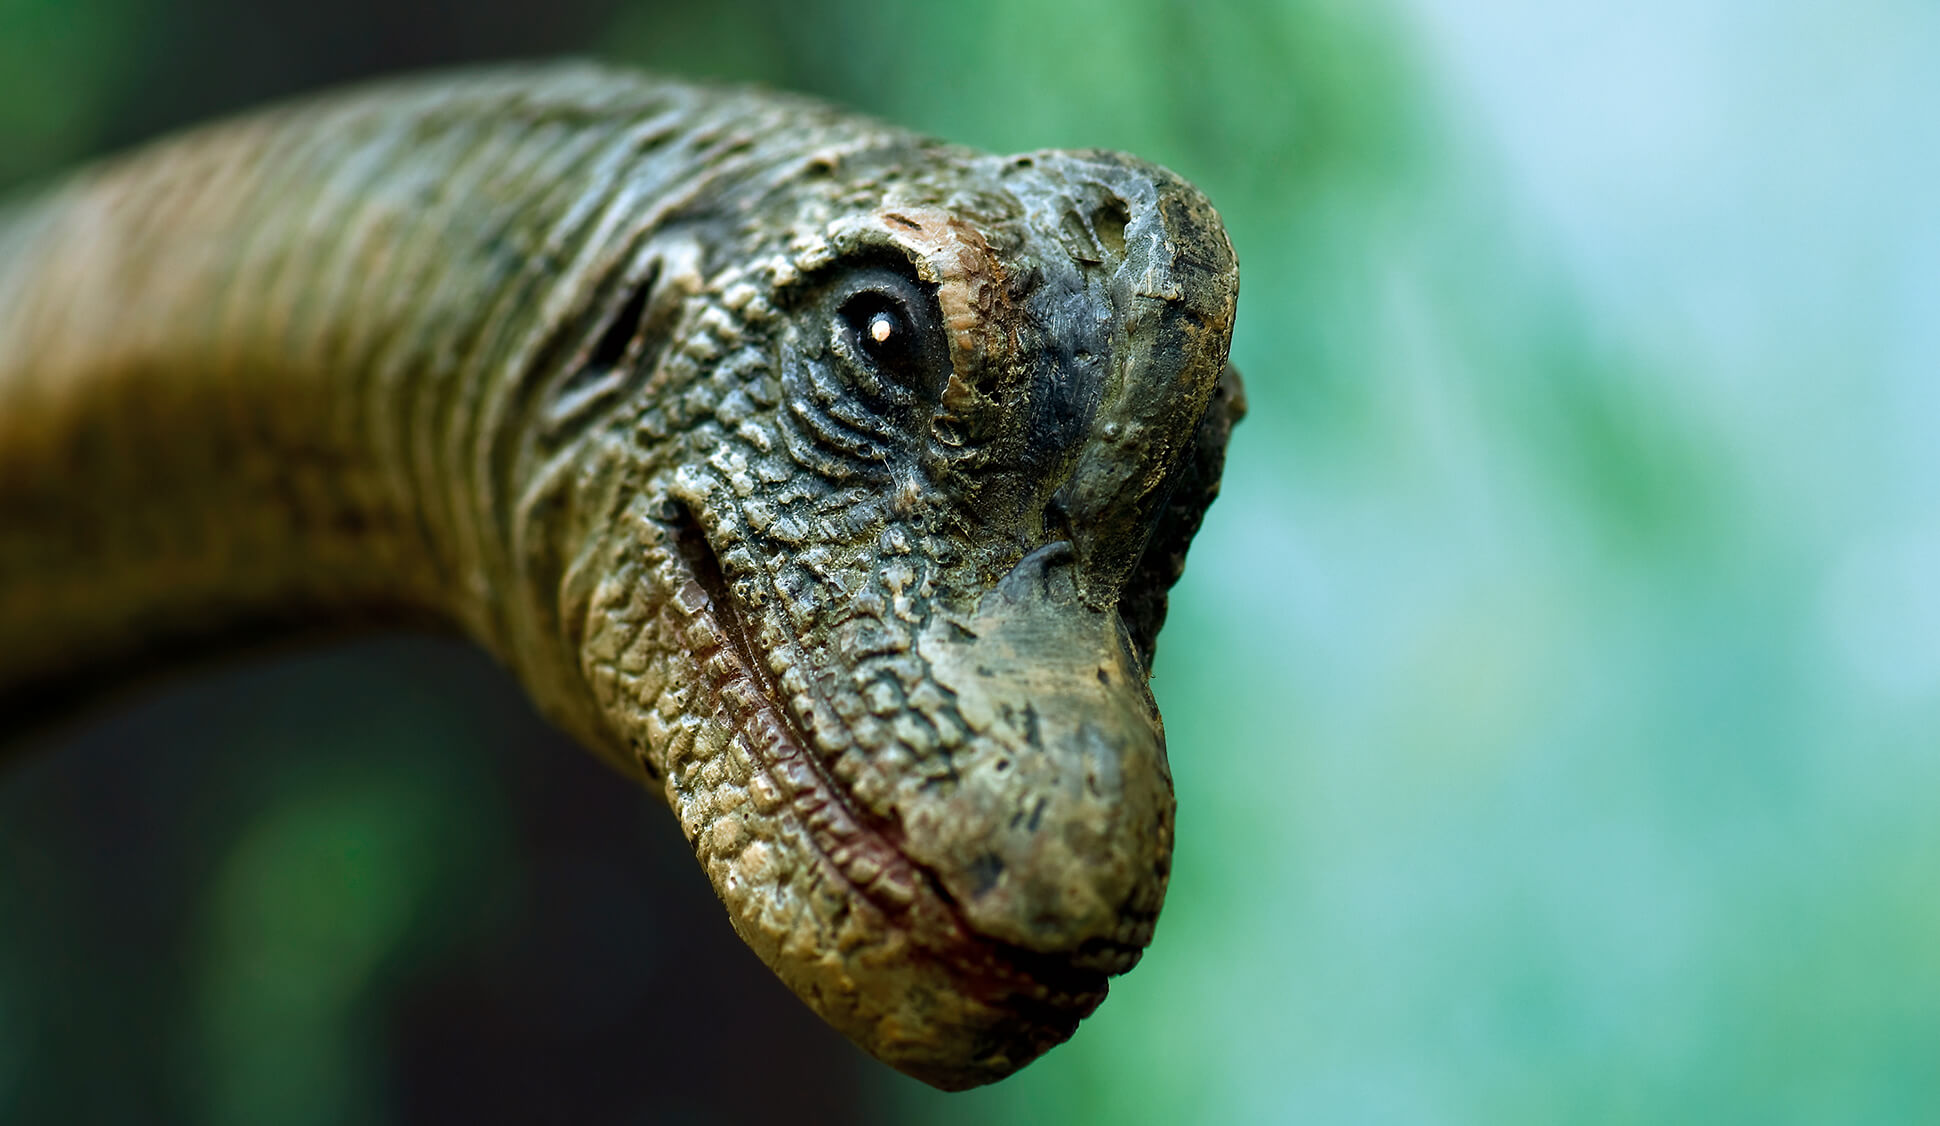 The Next 'Jurassic Park' Movie Just Might Change the Way You Look at Animal Rights | Blog | PETA Latino